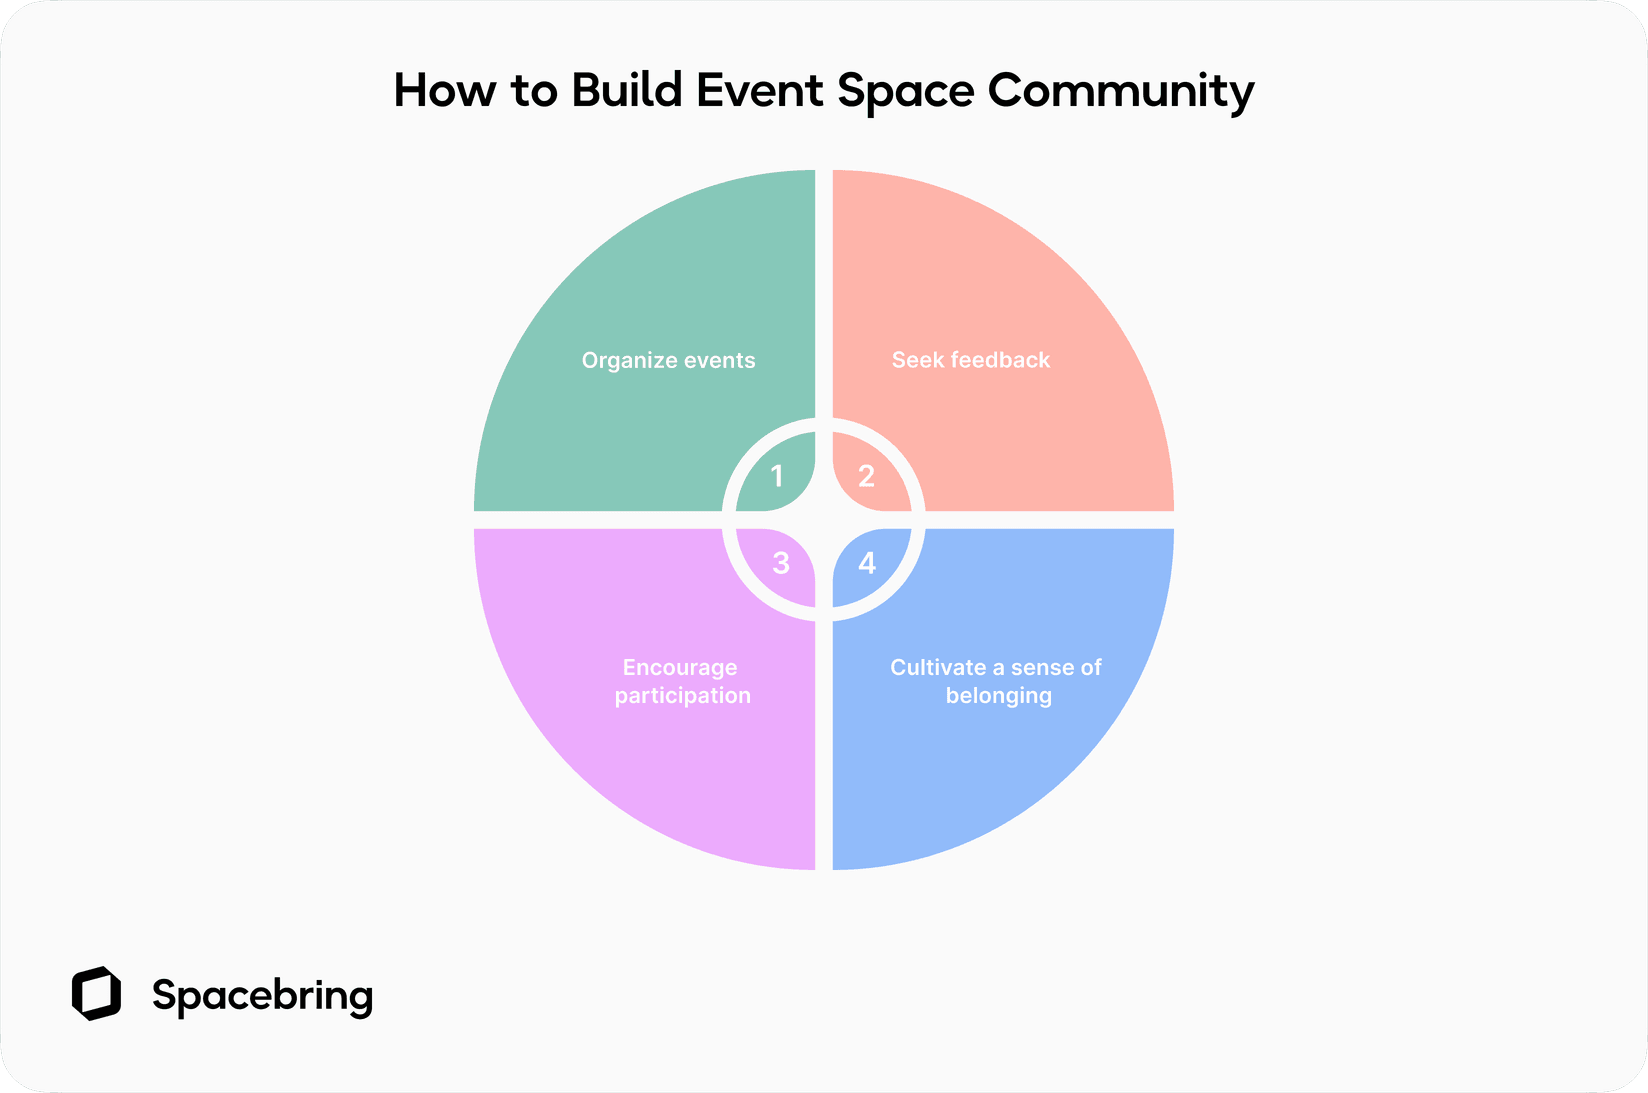 How to build event space community